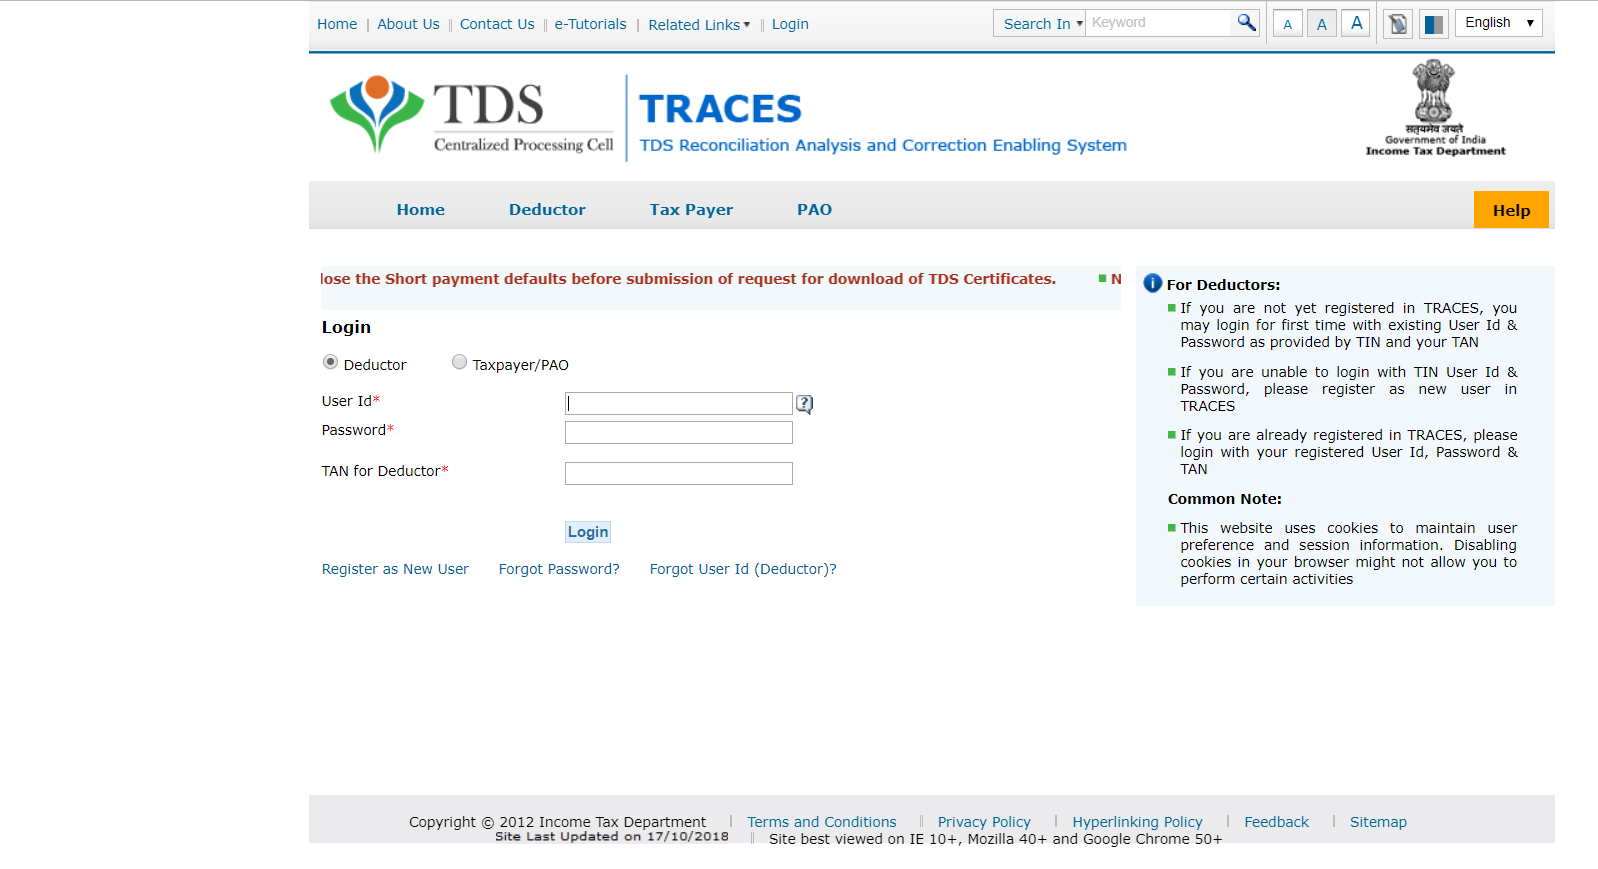 How to download TDS certificate in form 16B2